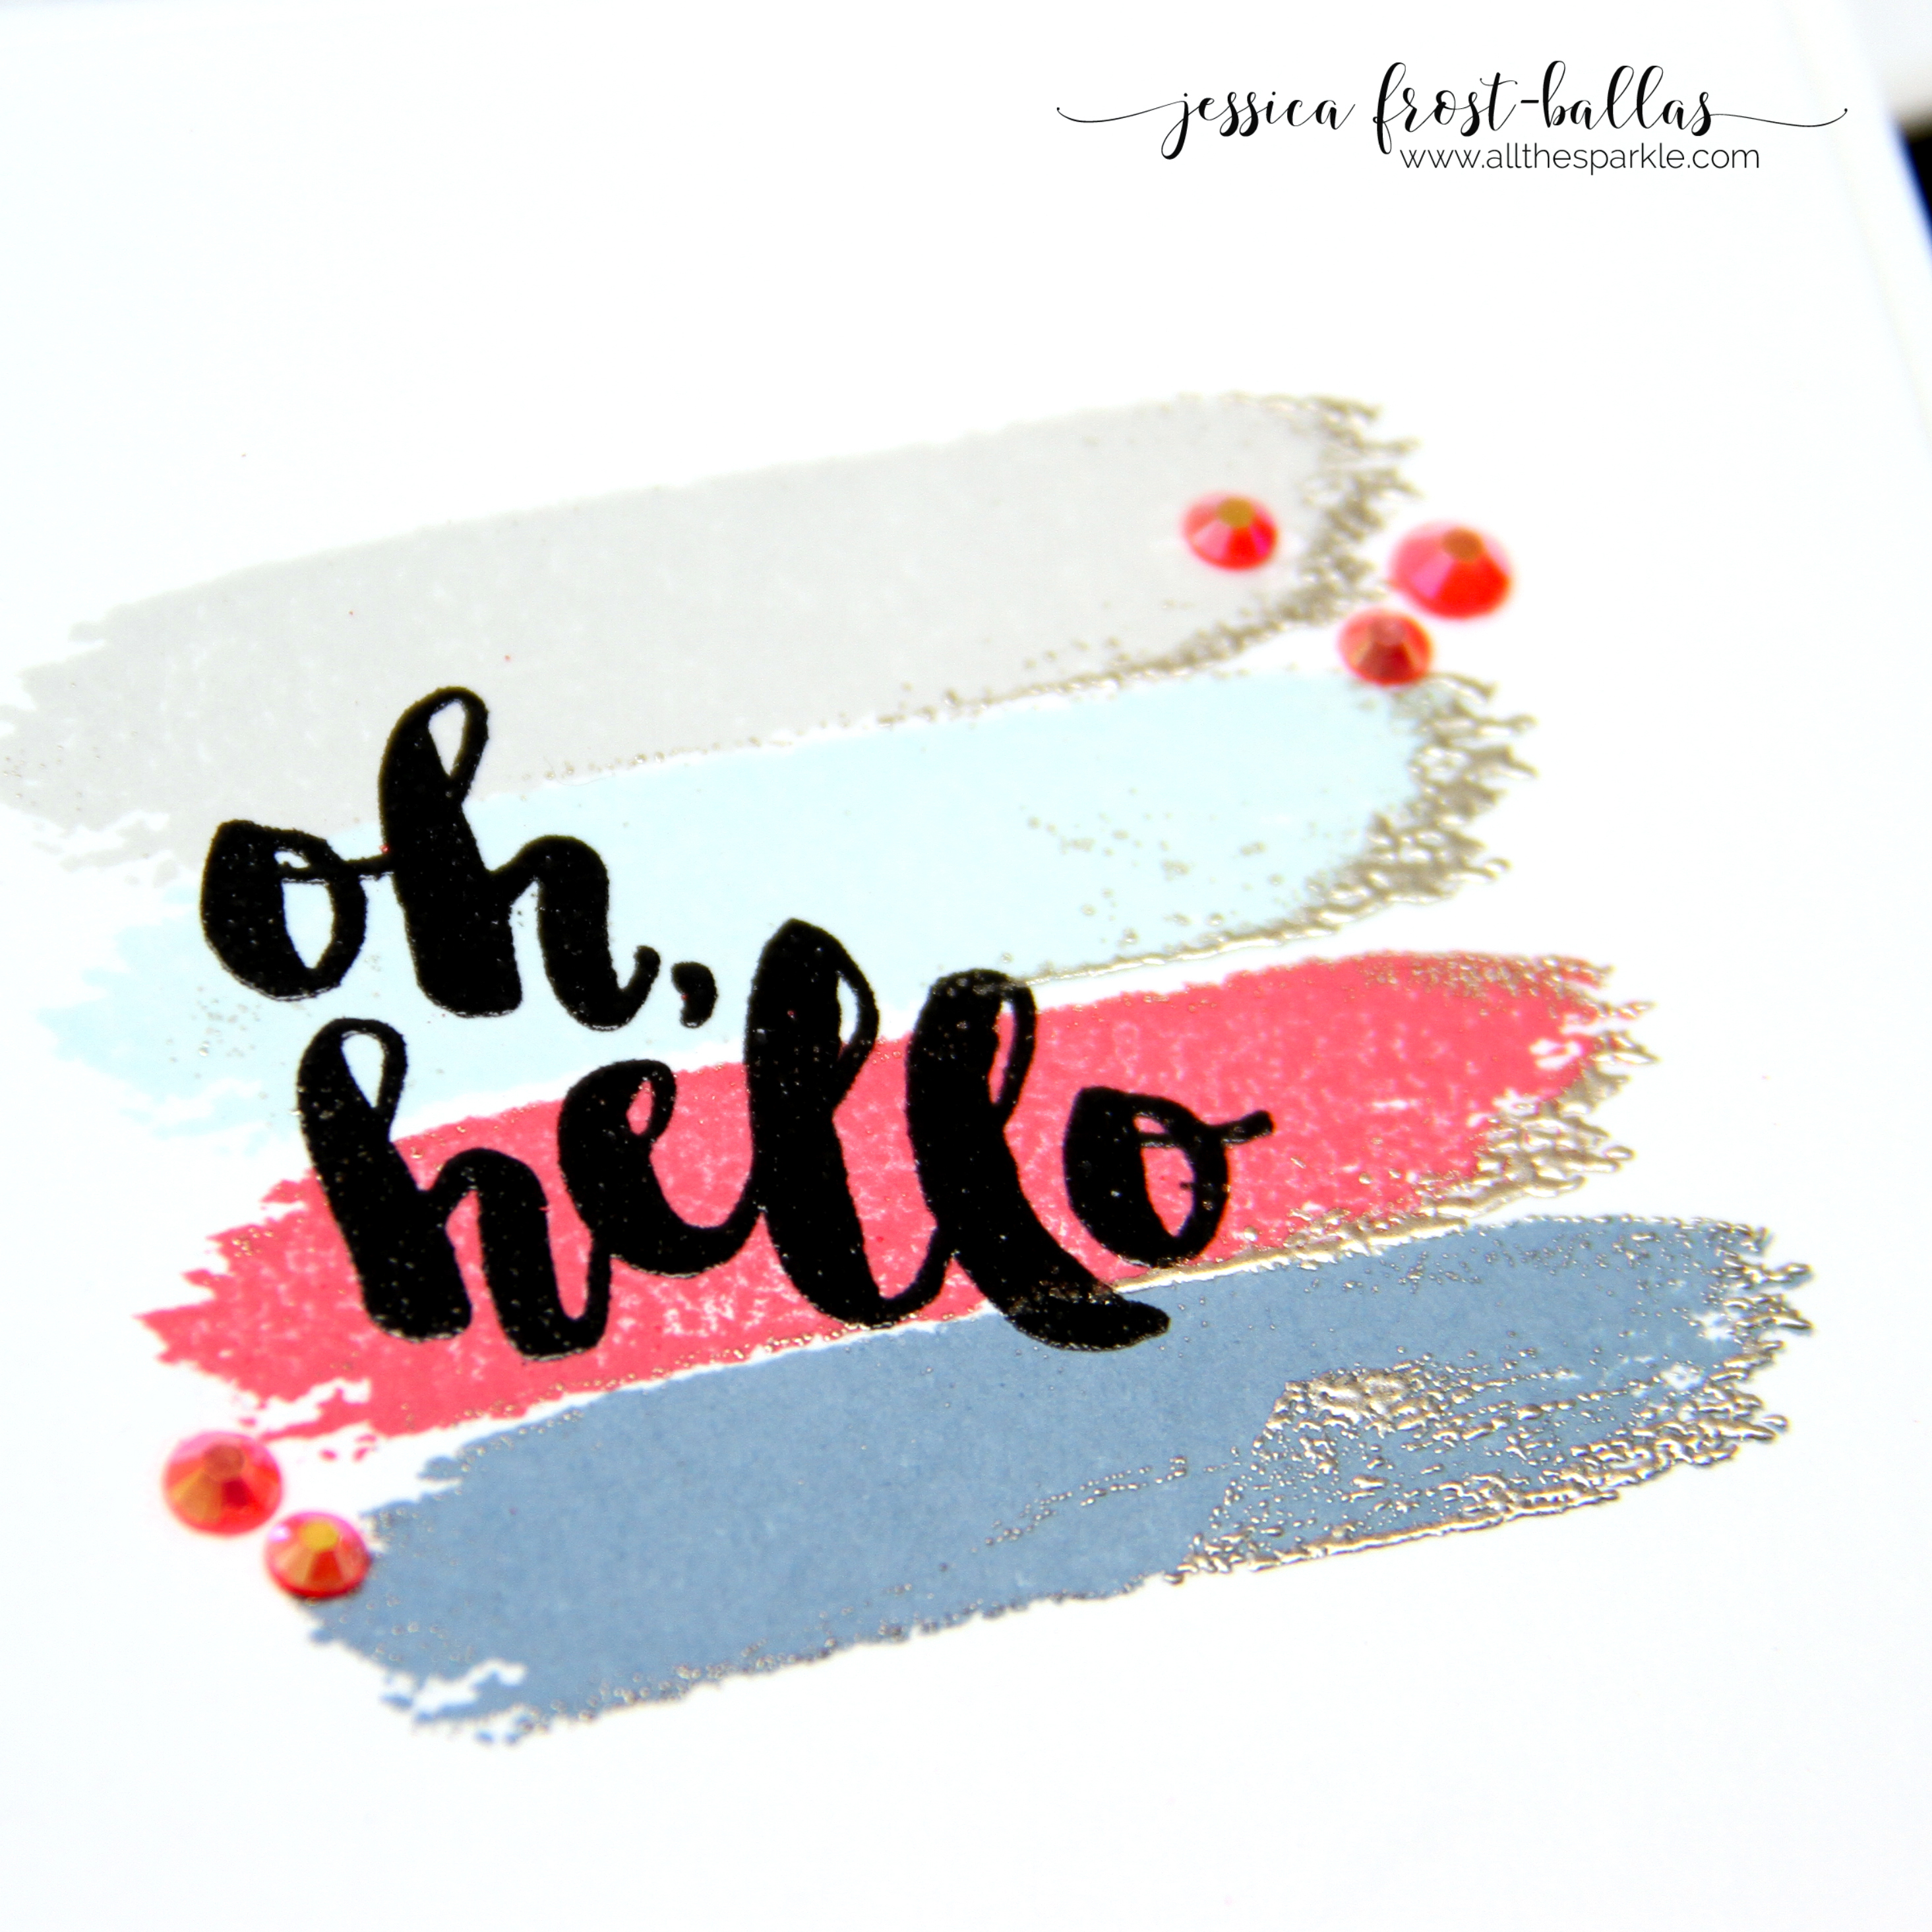 Oh Hello by Jessica Frost-Ballas for Simon Says Stamp